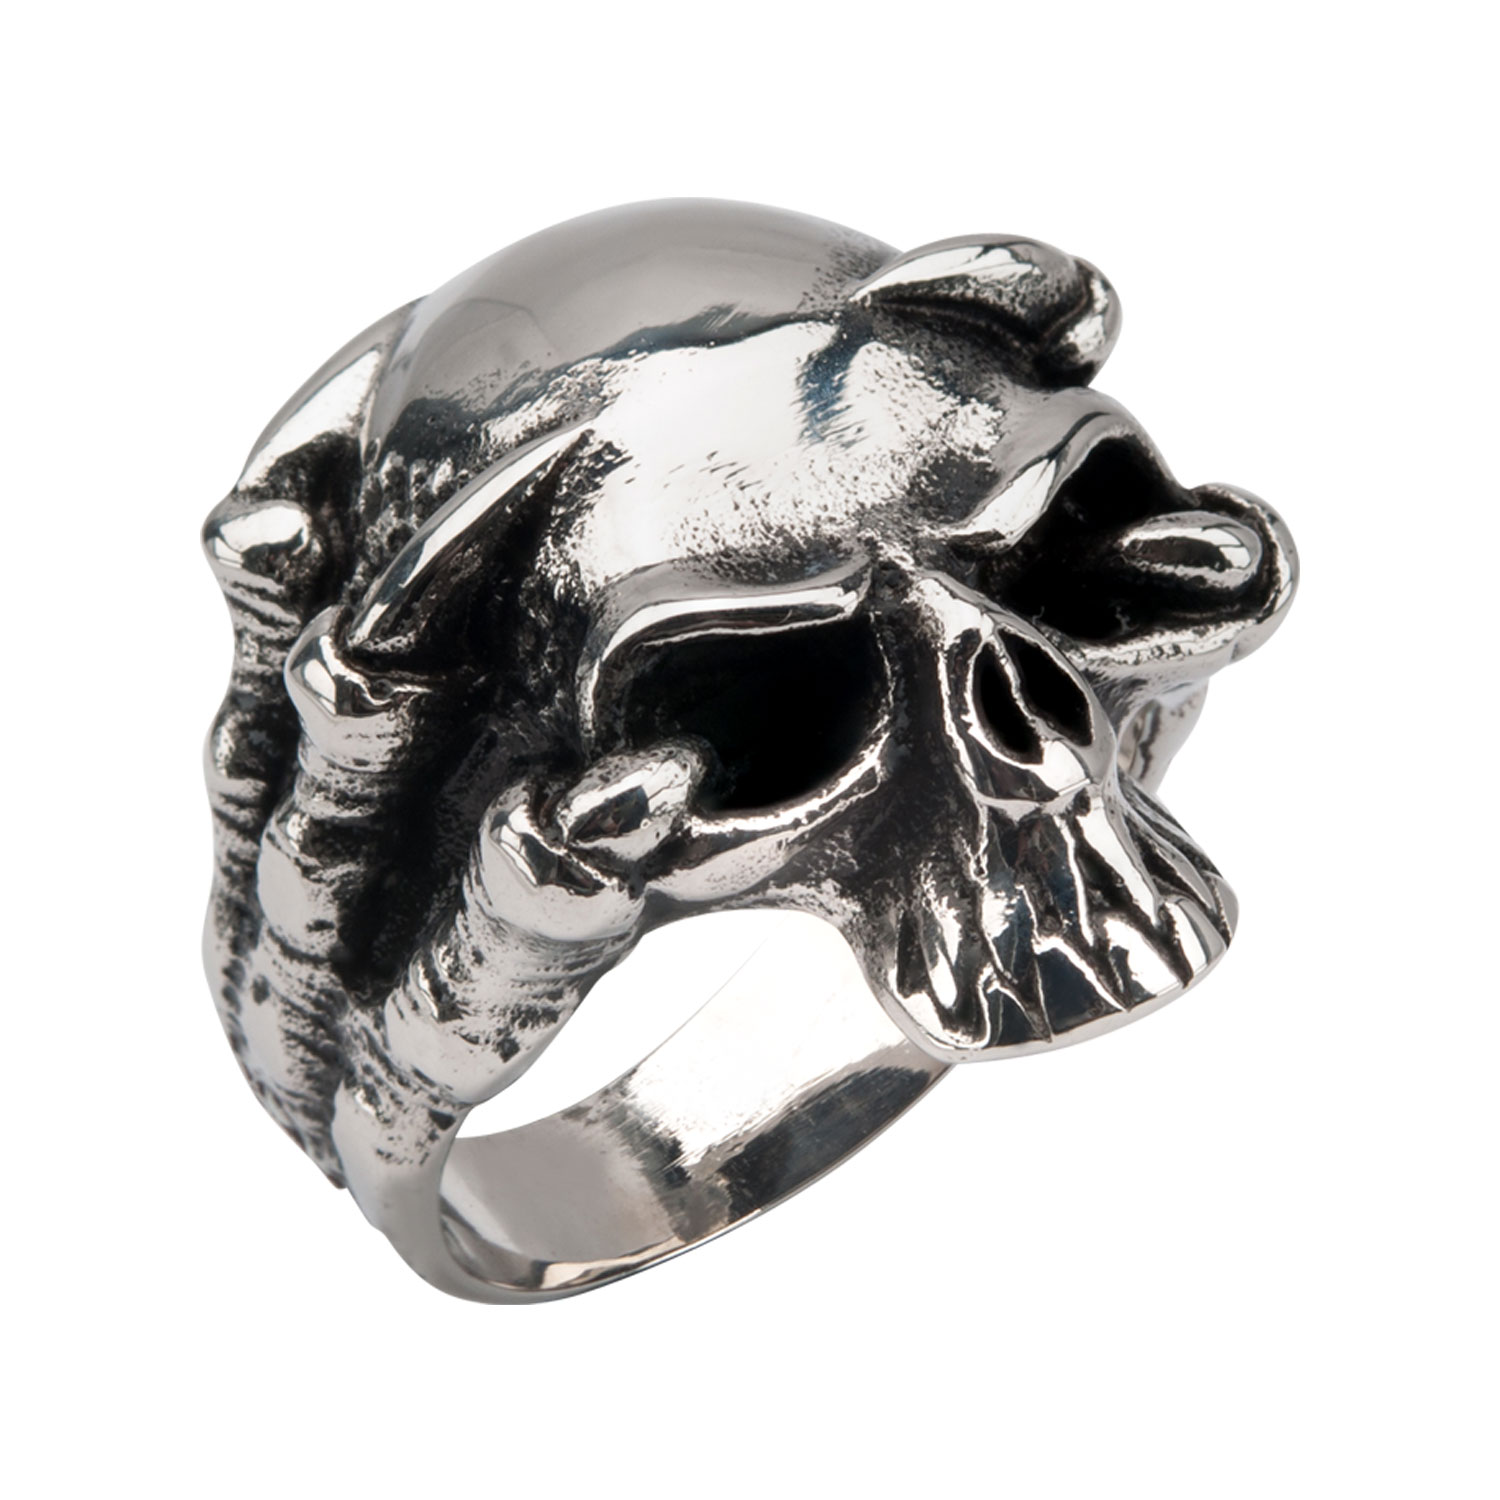 Black Oxidized Skull Ring with Claws Enchanted Jewelry Plainfield, CT